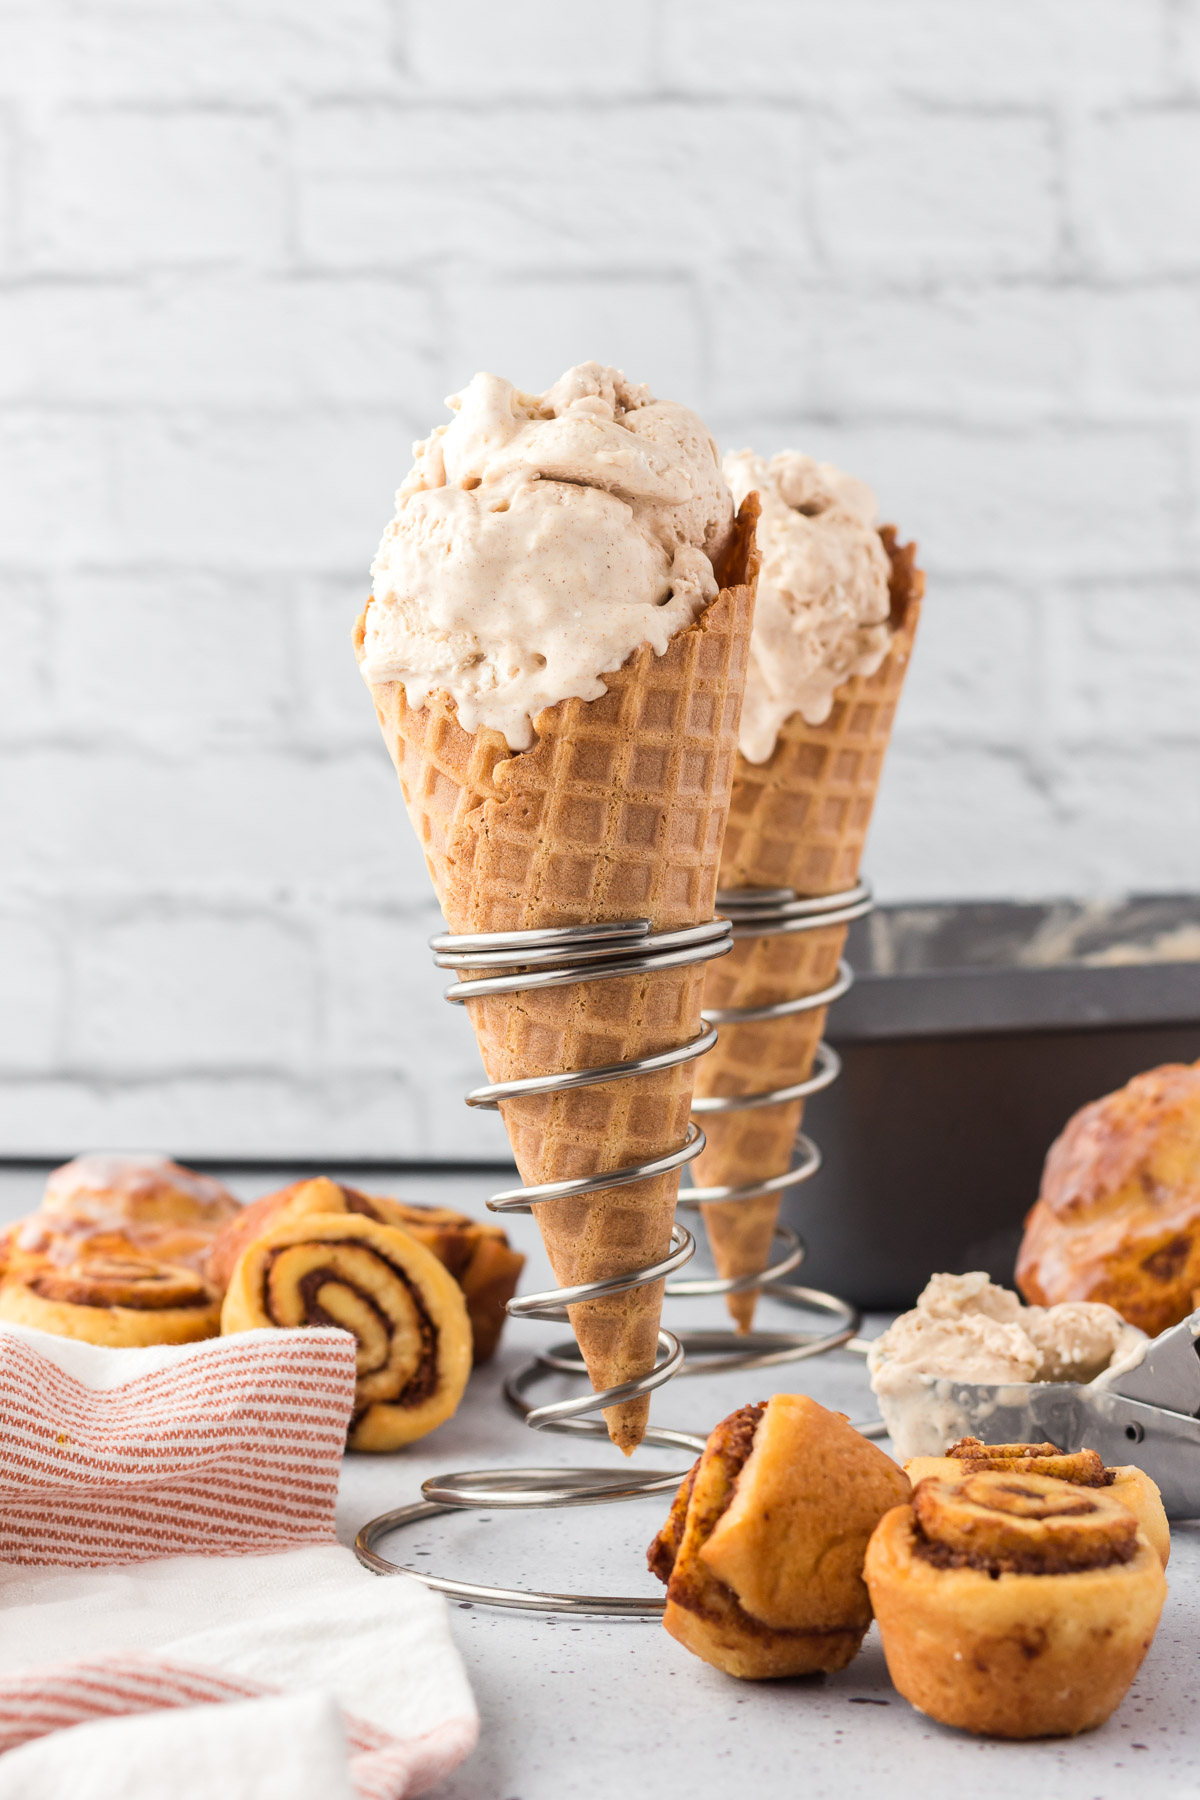 Cinnamon ice cream in cones in metal spiral stands with cinnamon rolls around it and a kitchen towel next to them.